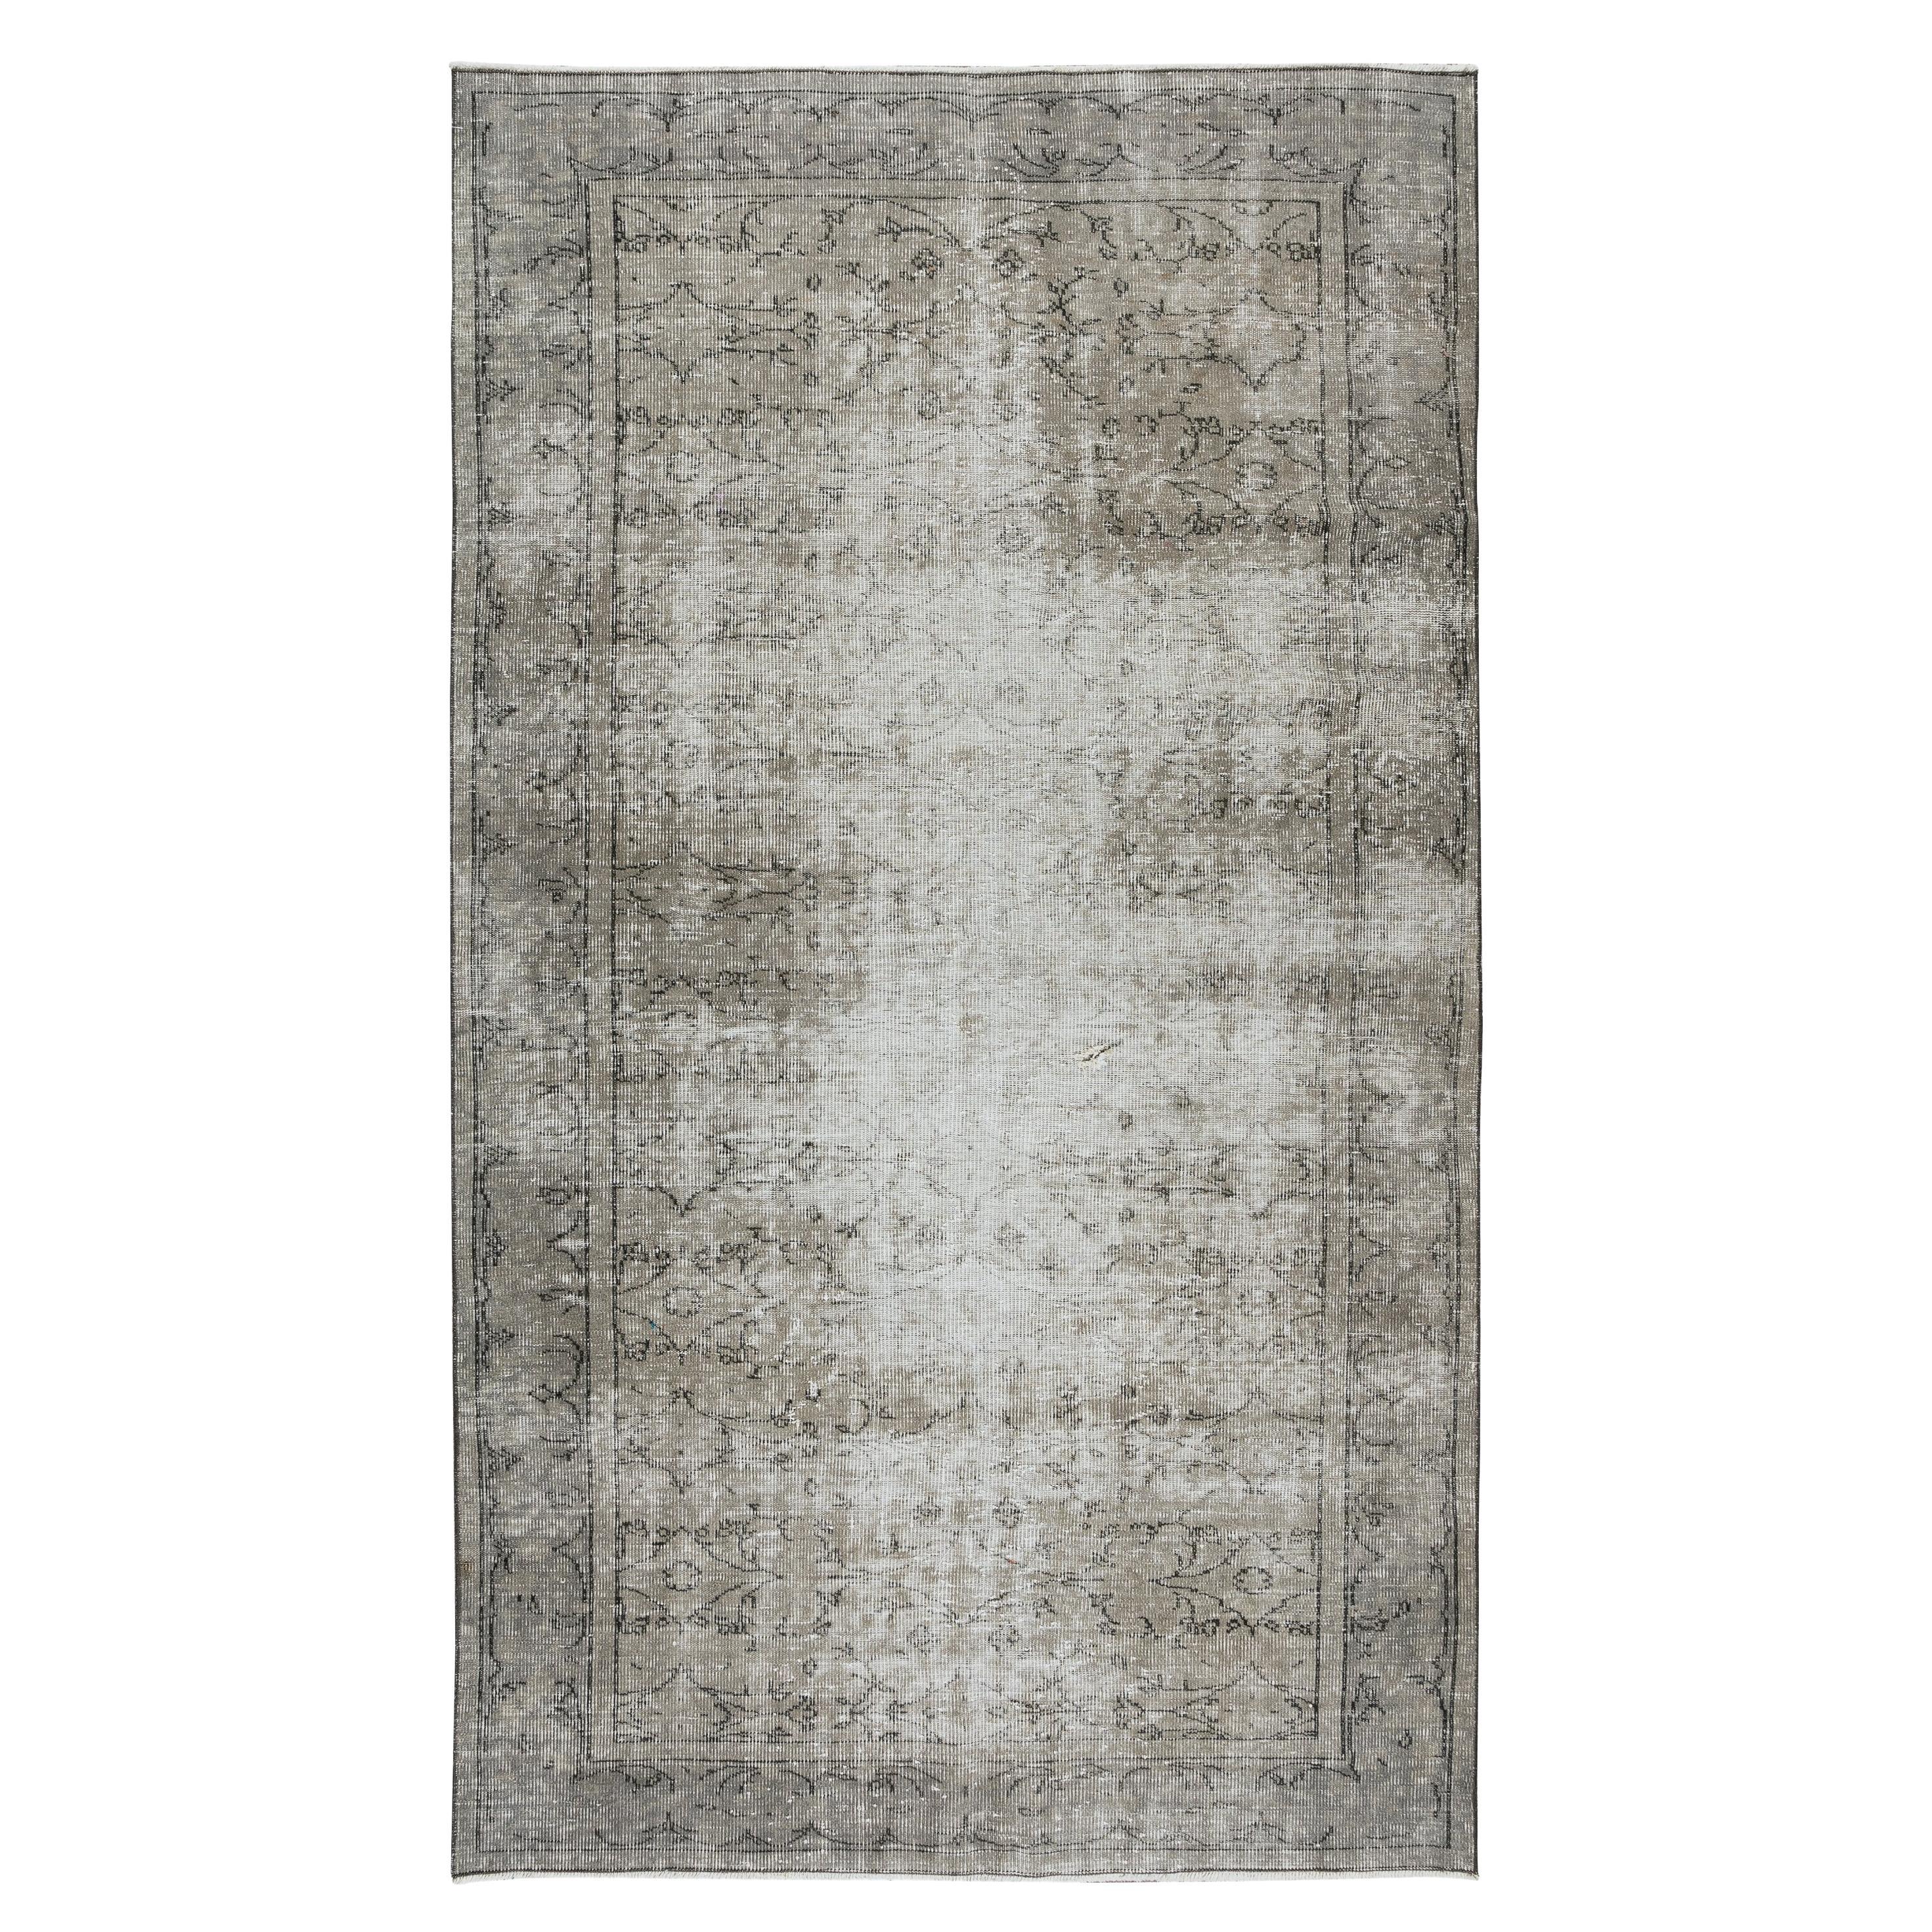 5.3x8.9 Ft Distressed 1950s Handmade Anatolian Area Rug Over-Dyed in Gray Color For Sale